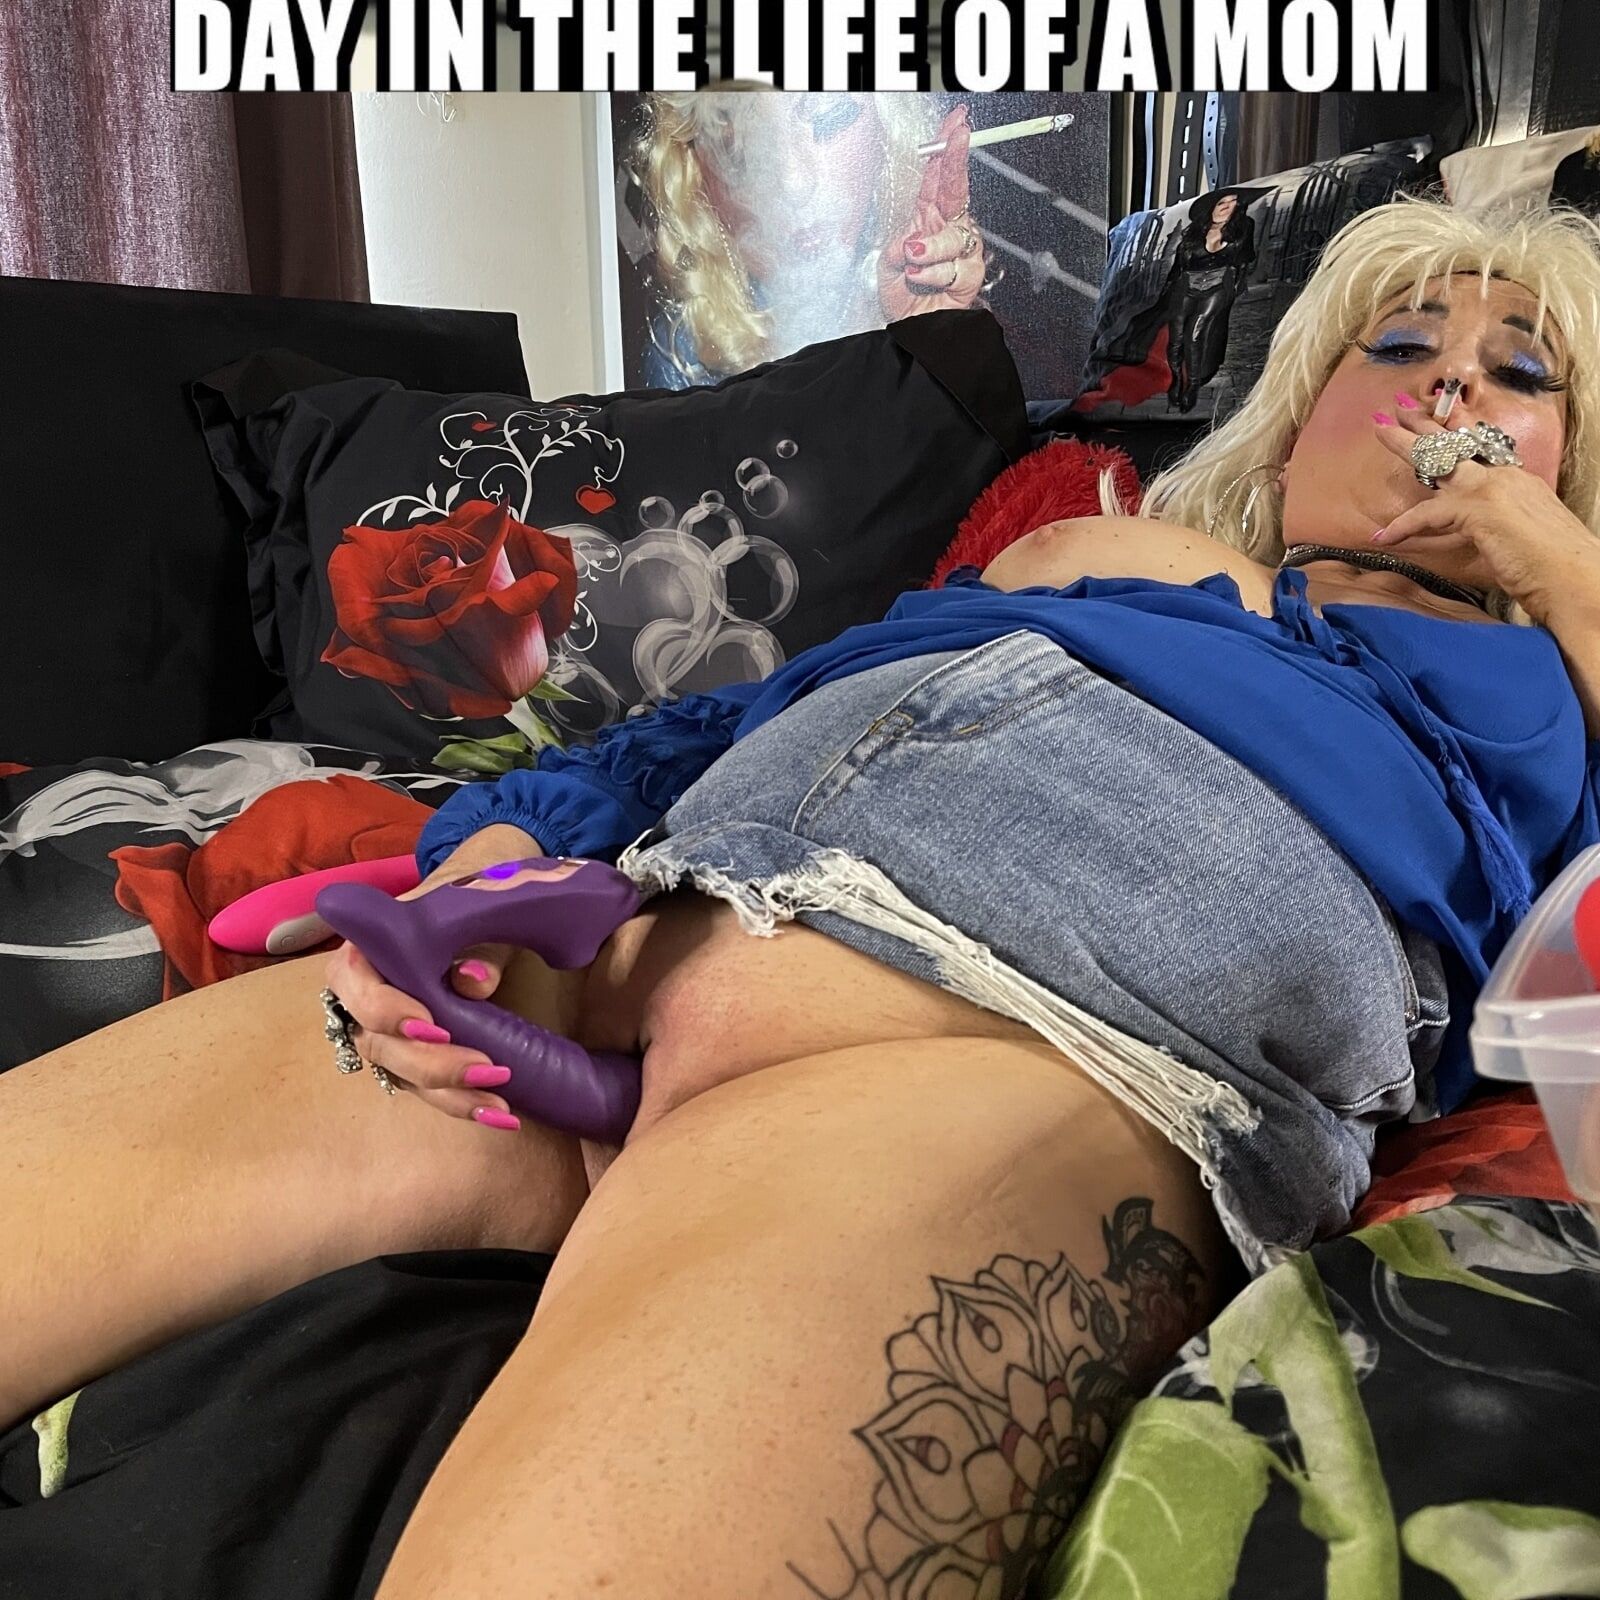 SHIRLEY THE LIFE OF A MOM #43